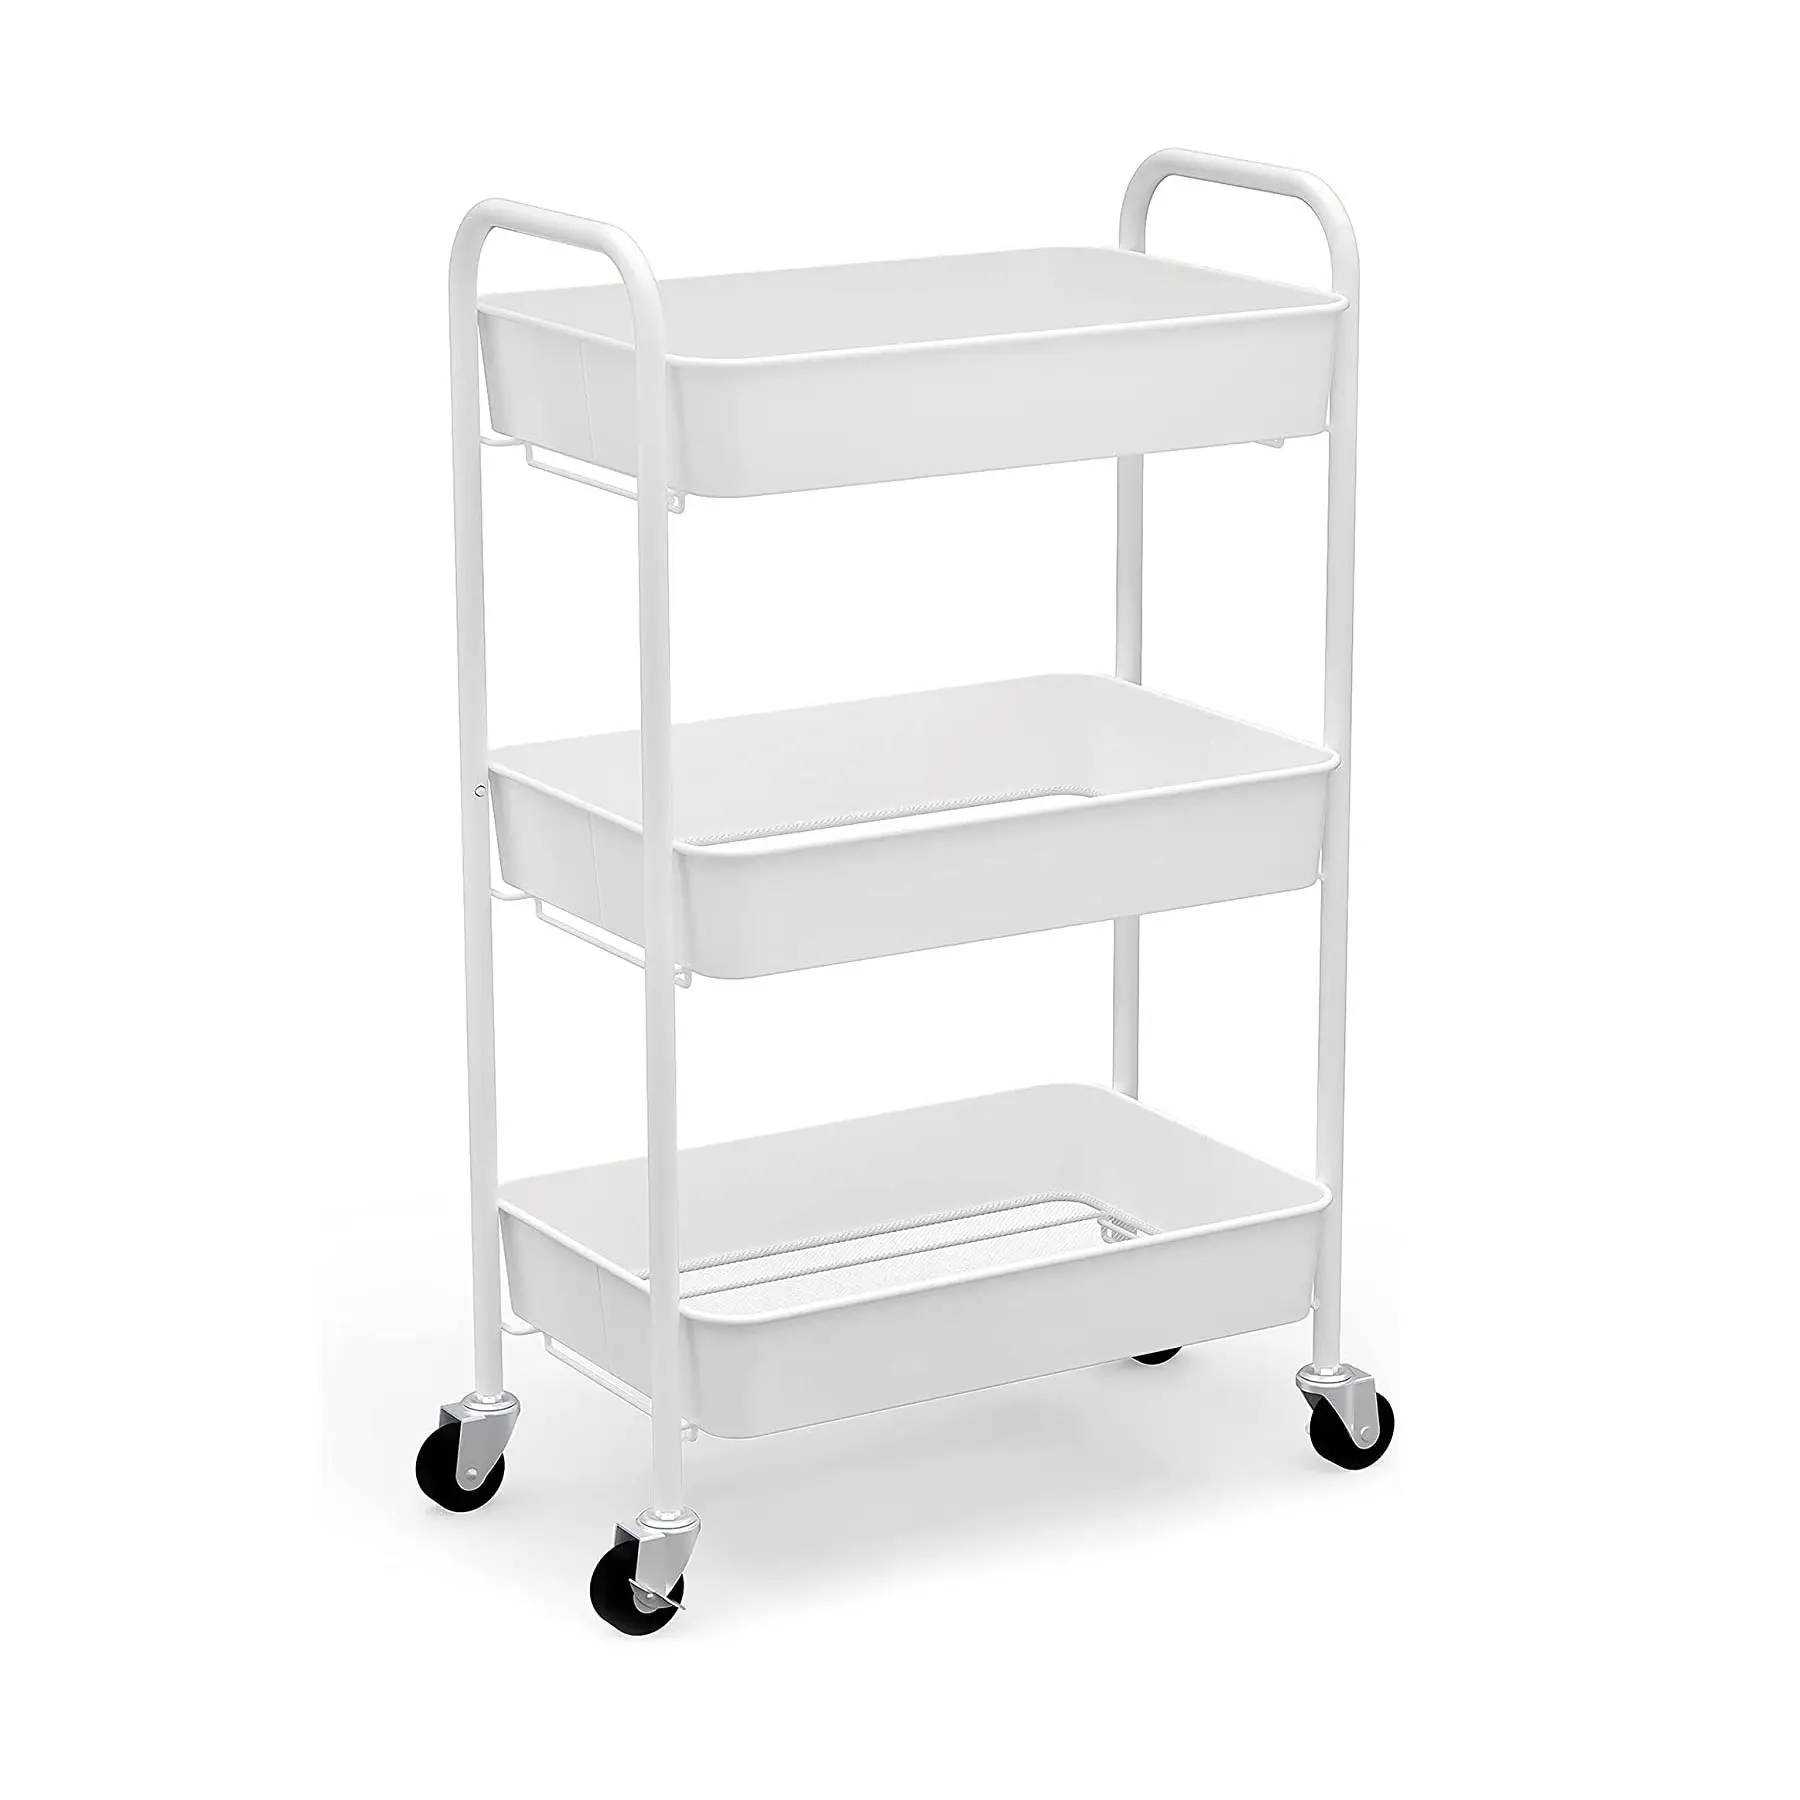 3-Tier Pit Tool Cart Rolling Metal Storage Organizer - Mobile Utility Cart Kitchen Cart With Caster Wheels